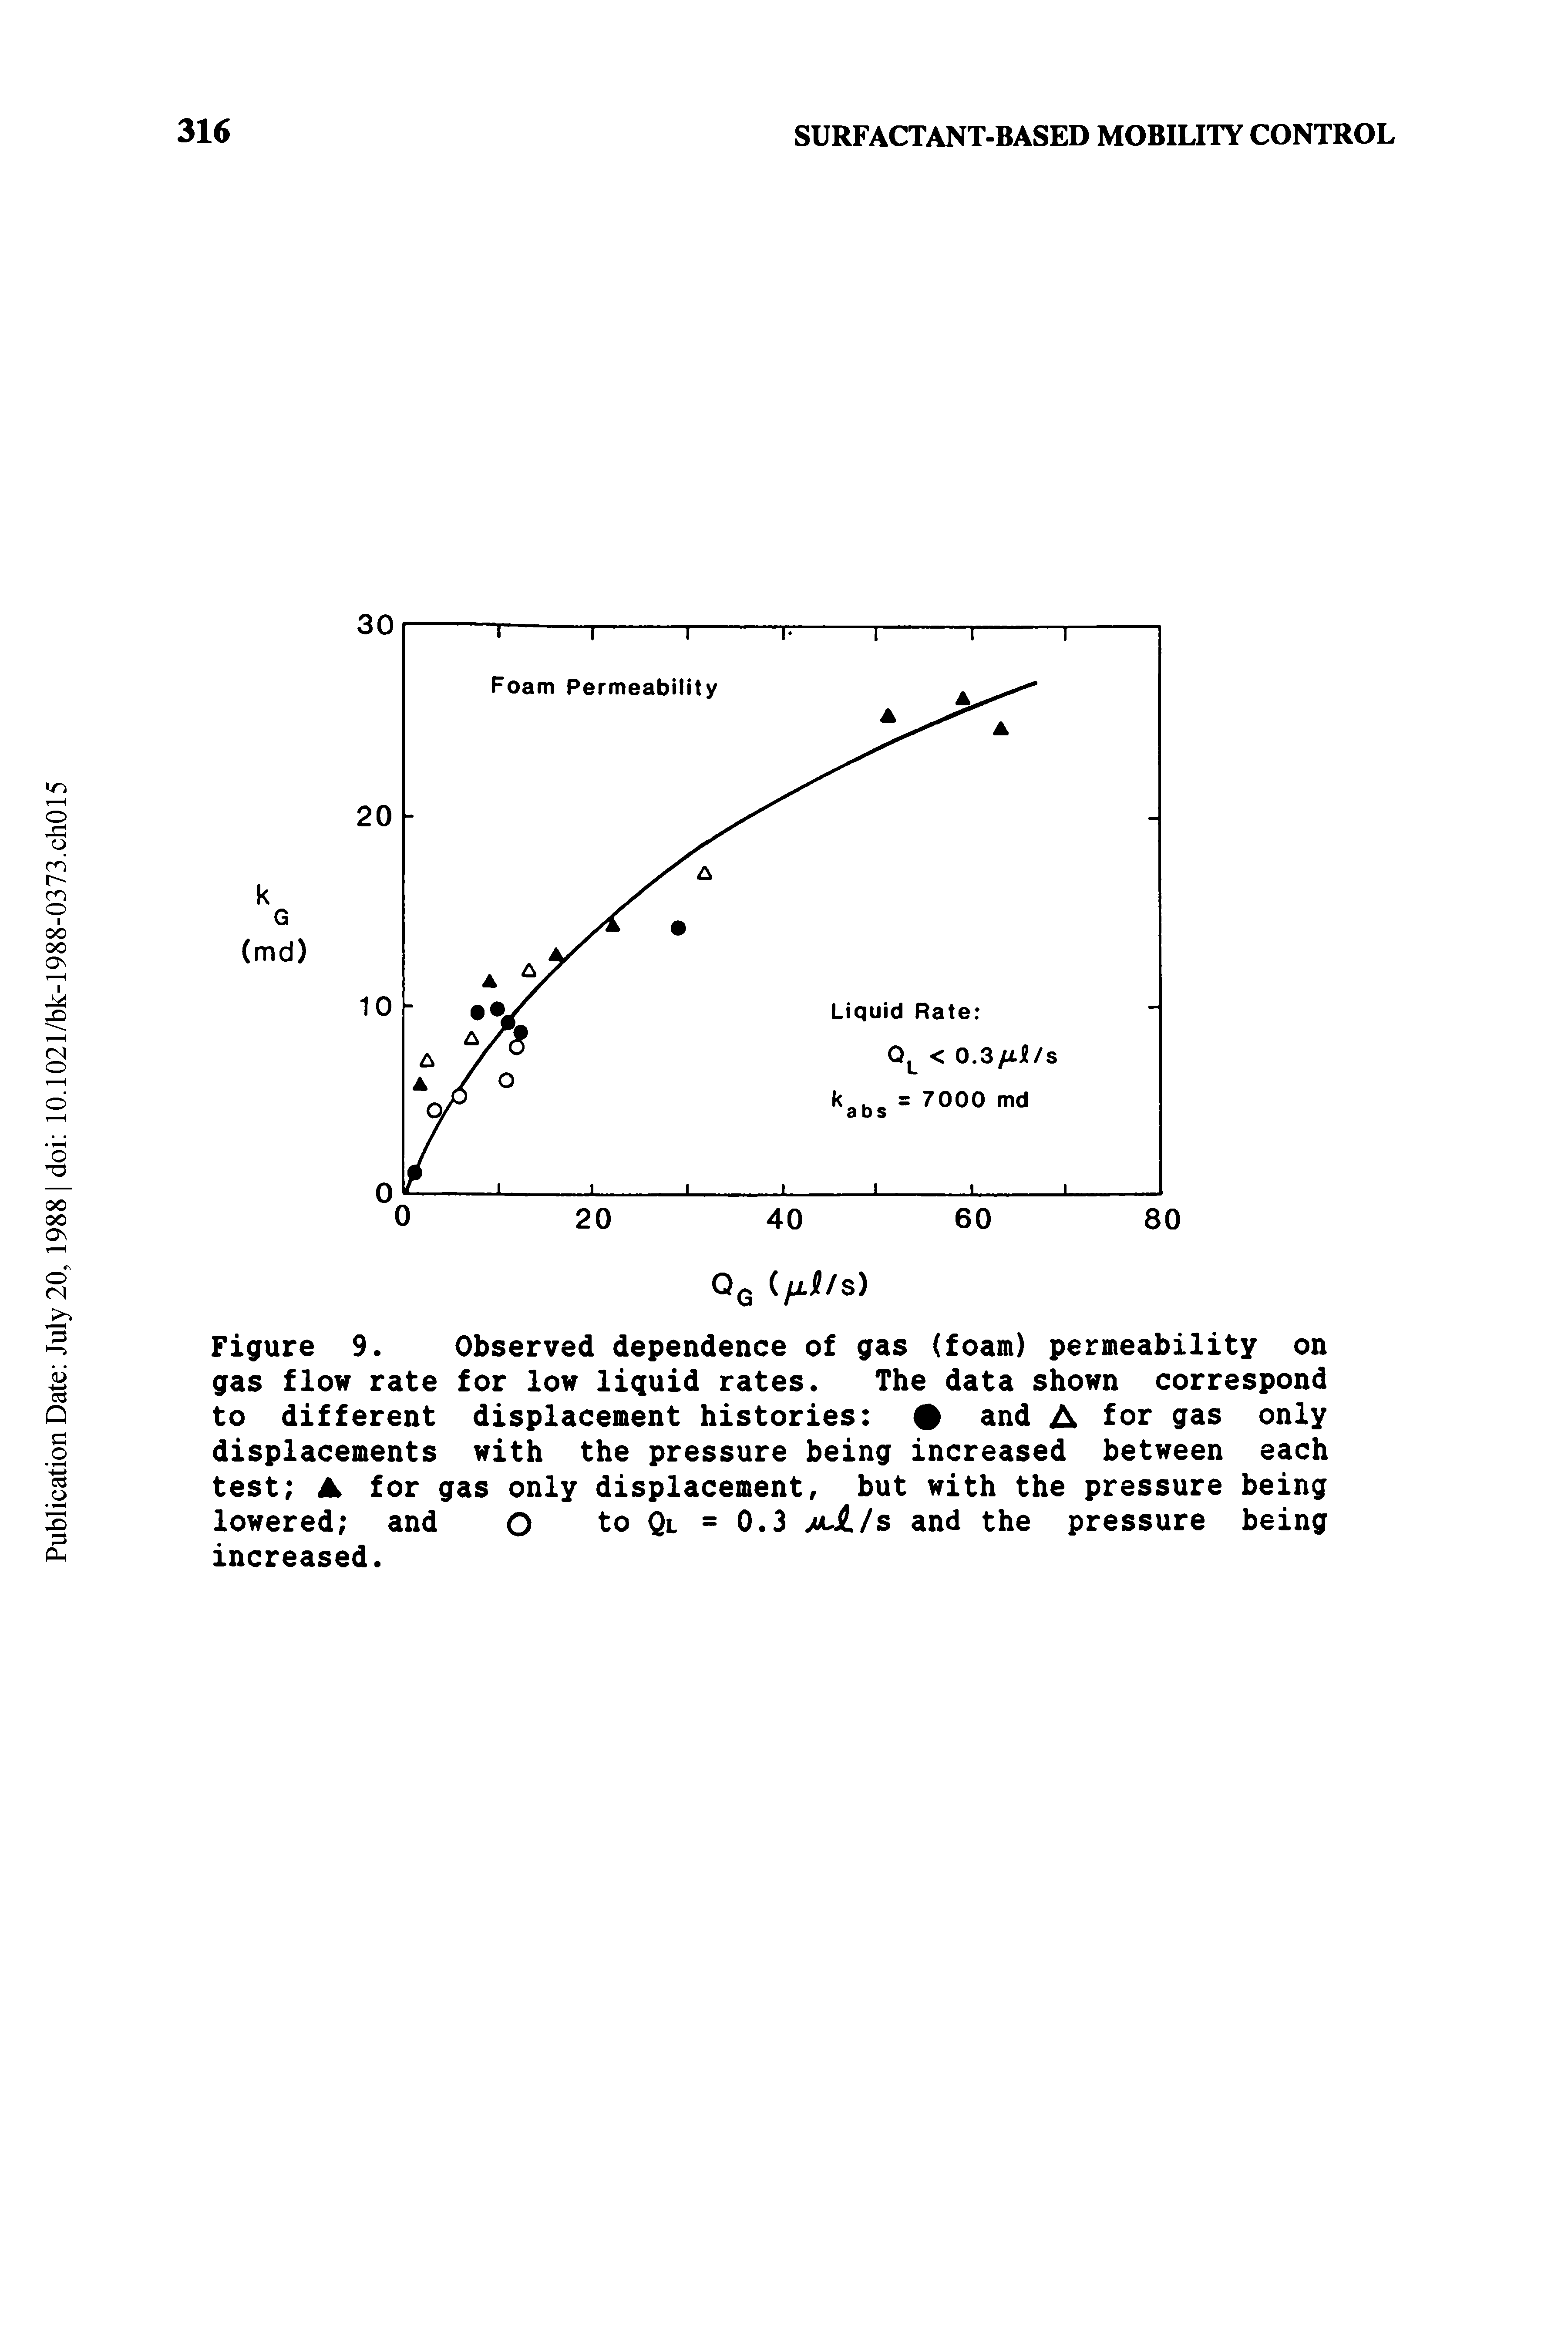 Figure 9. Observed dependence of gas (foam) permeability on gas flow rate for low liquid rates. The data shown correspond to different displacement histories and A for gas only displacements with the pressure being increased between each test for gas only displacement, but with the pressure being lowered and O to Ql = 0.3 jjJL/s and the pressure being increased.